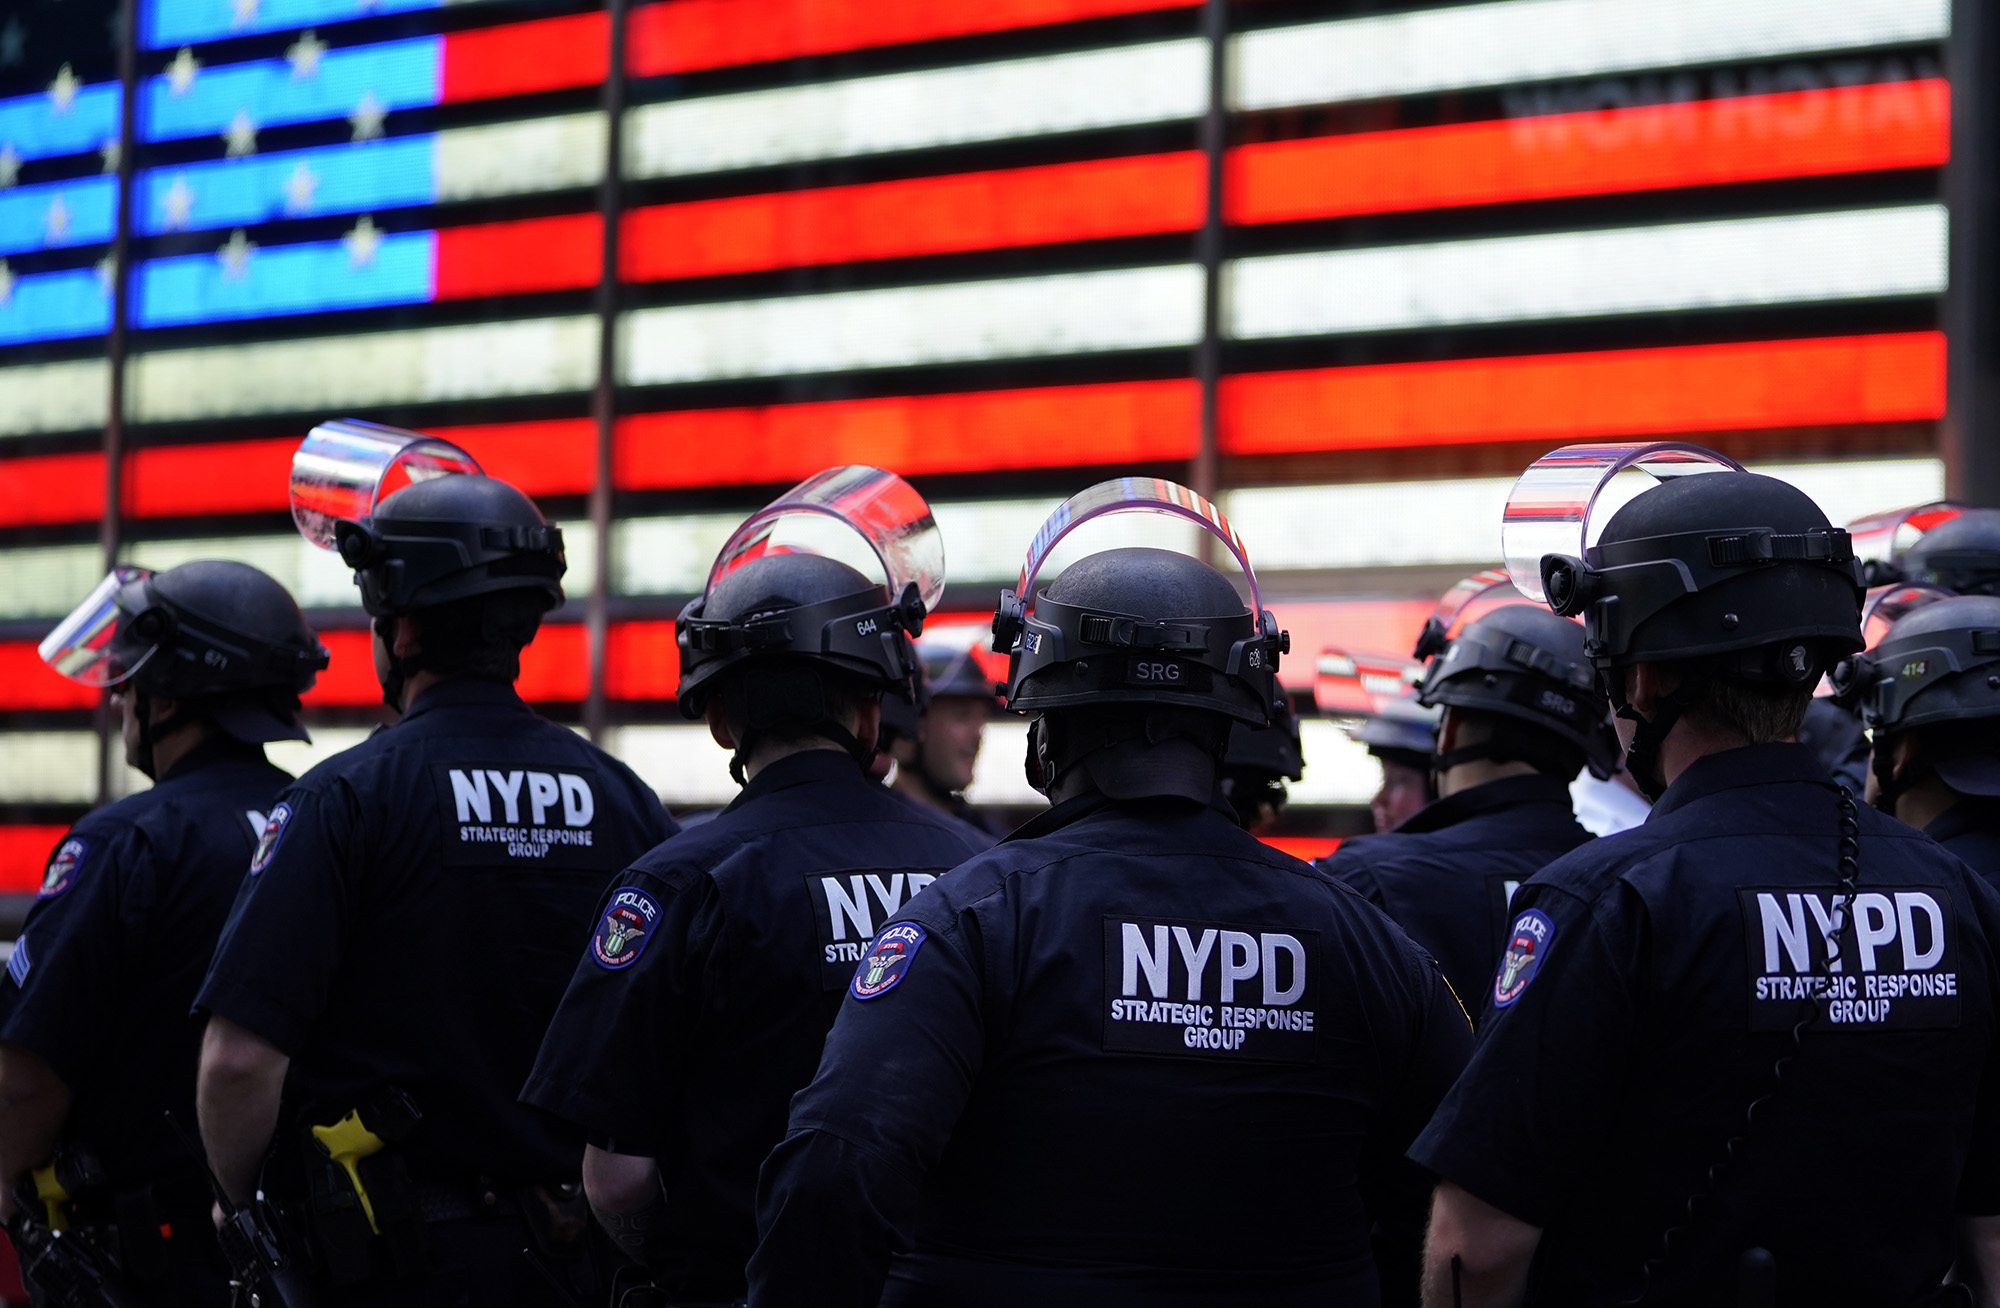 PHOTO: NYPD police officers watch demonstrators in Times Square in New York, June 1, 2020.